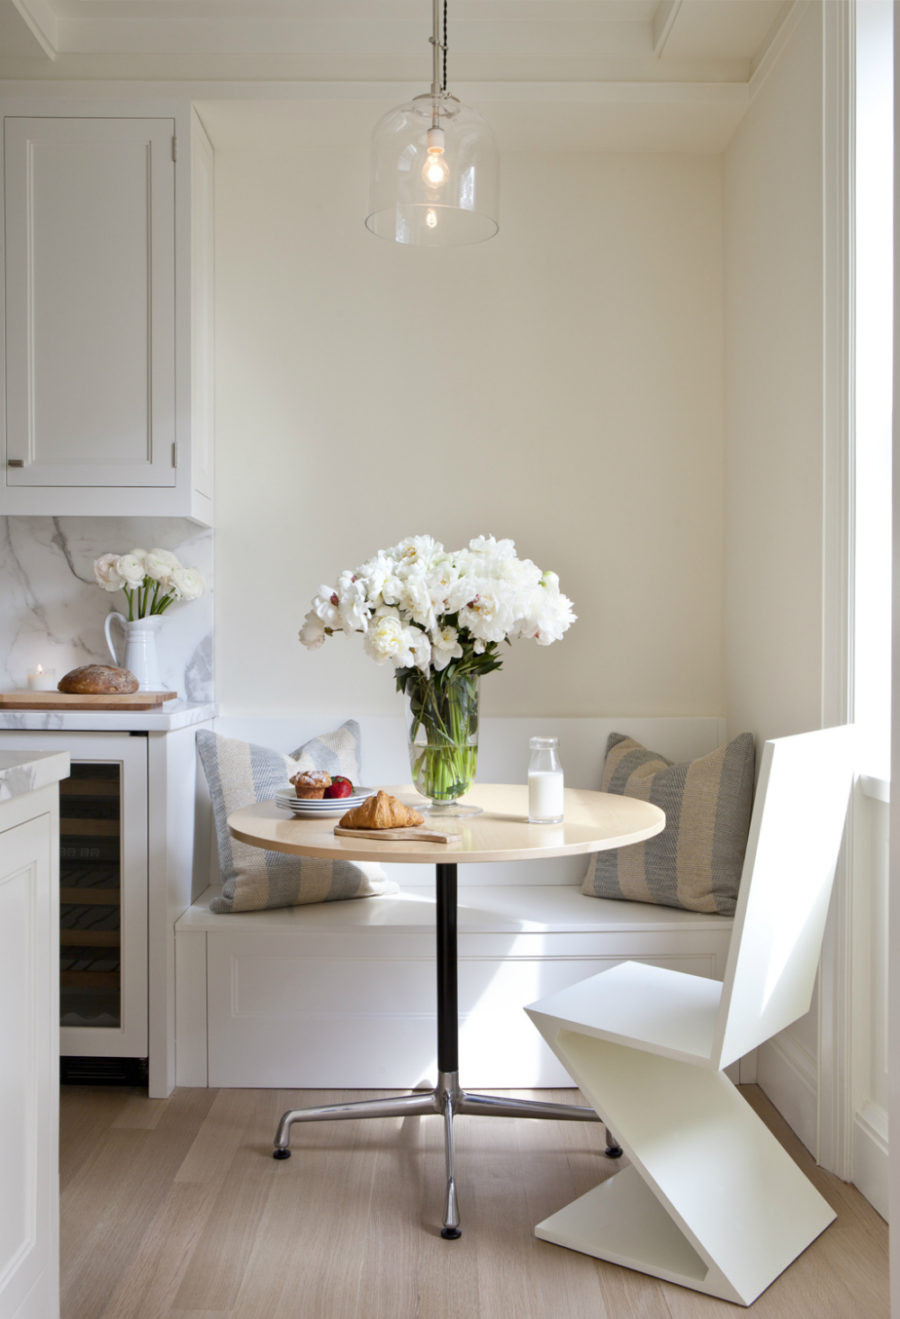 Small Kitchen Nook Ideas
 Modern Breakfast Nook Ideas That Will Make You Want to